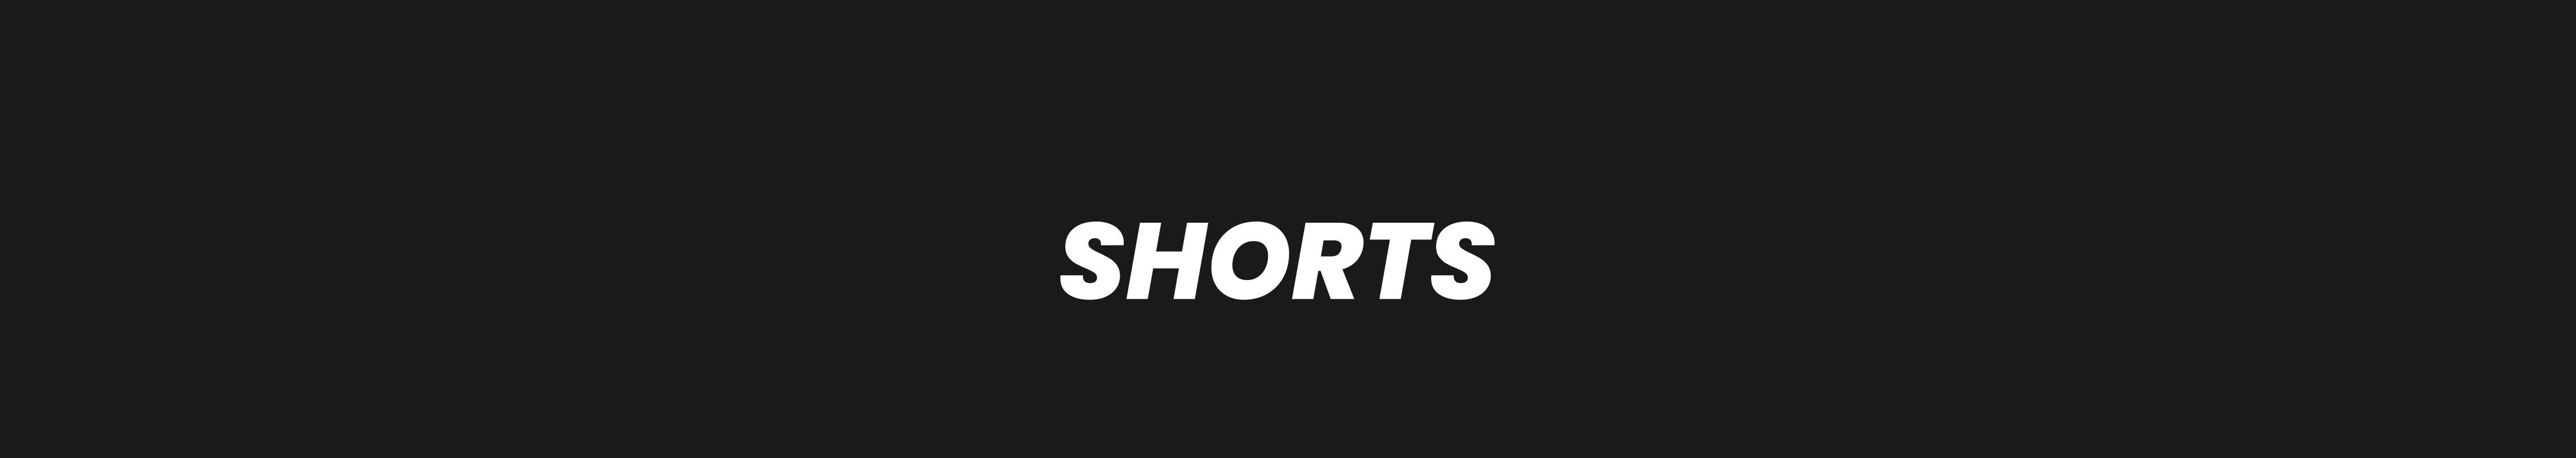 A black banner displaying the word "shorts" for the Tech Club Shorts collection. In this collection you'll find everything from Nike's Dri-FIT Stride Shorts to their Challenger Shorts.